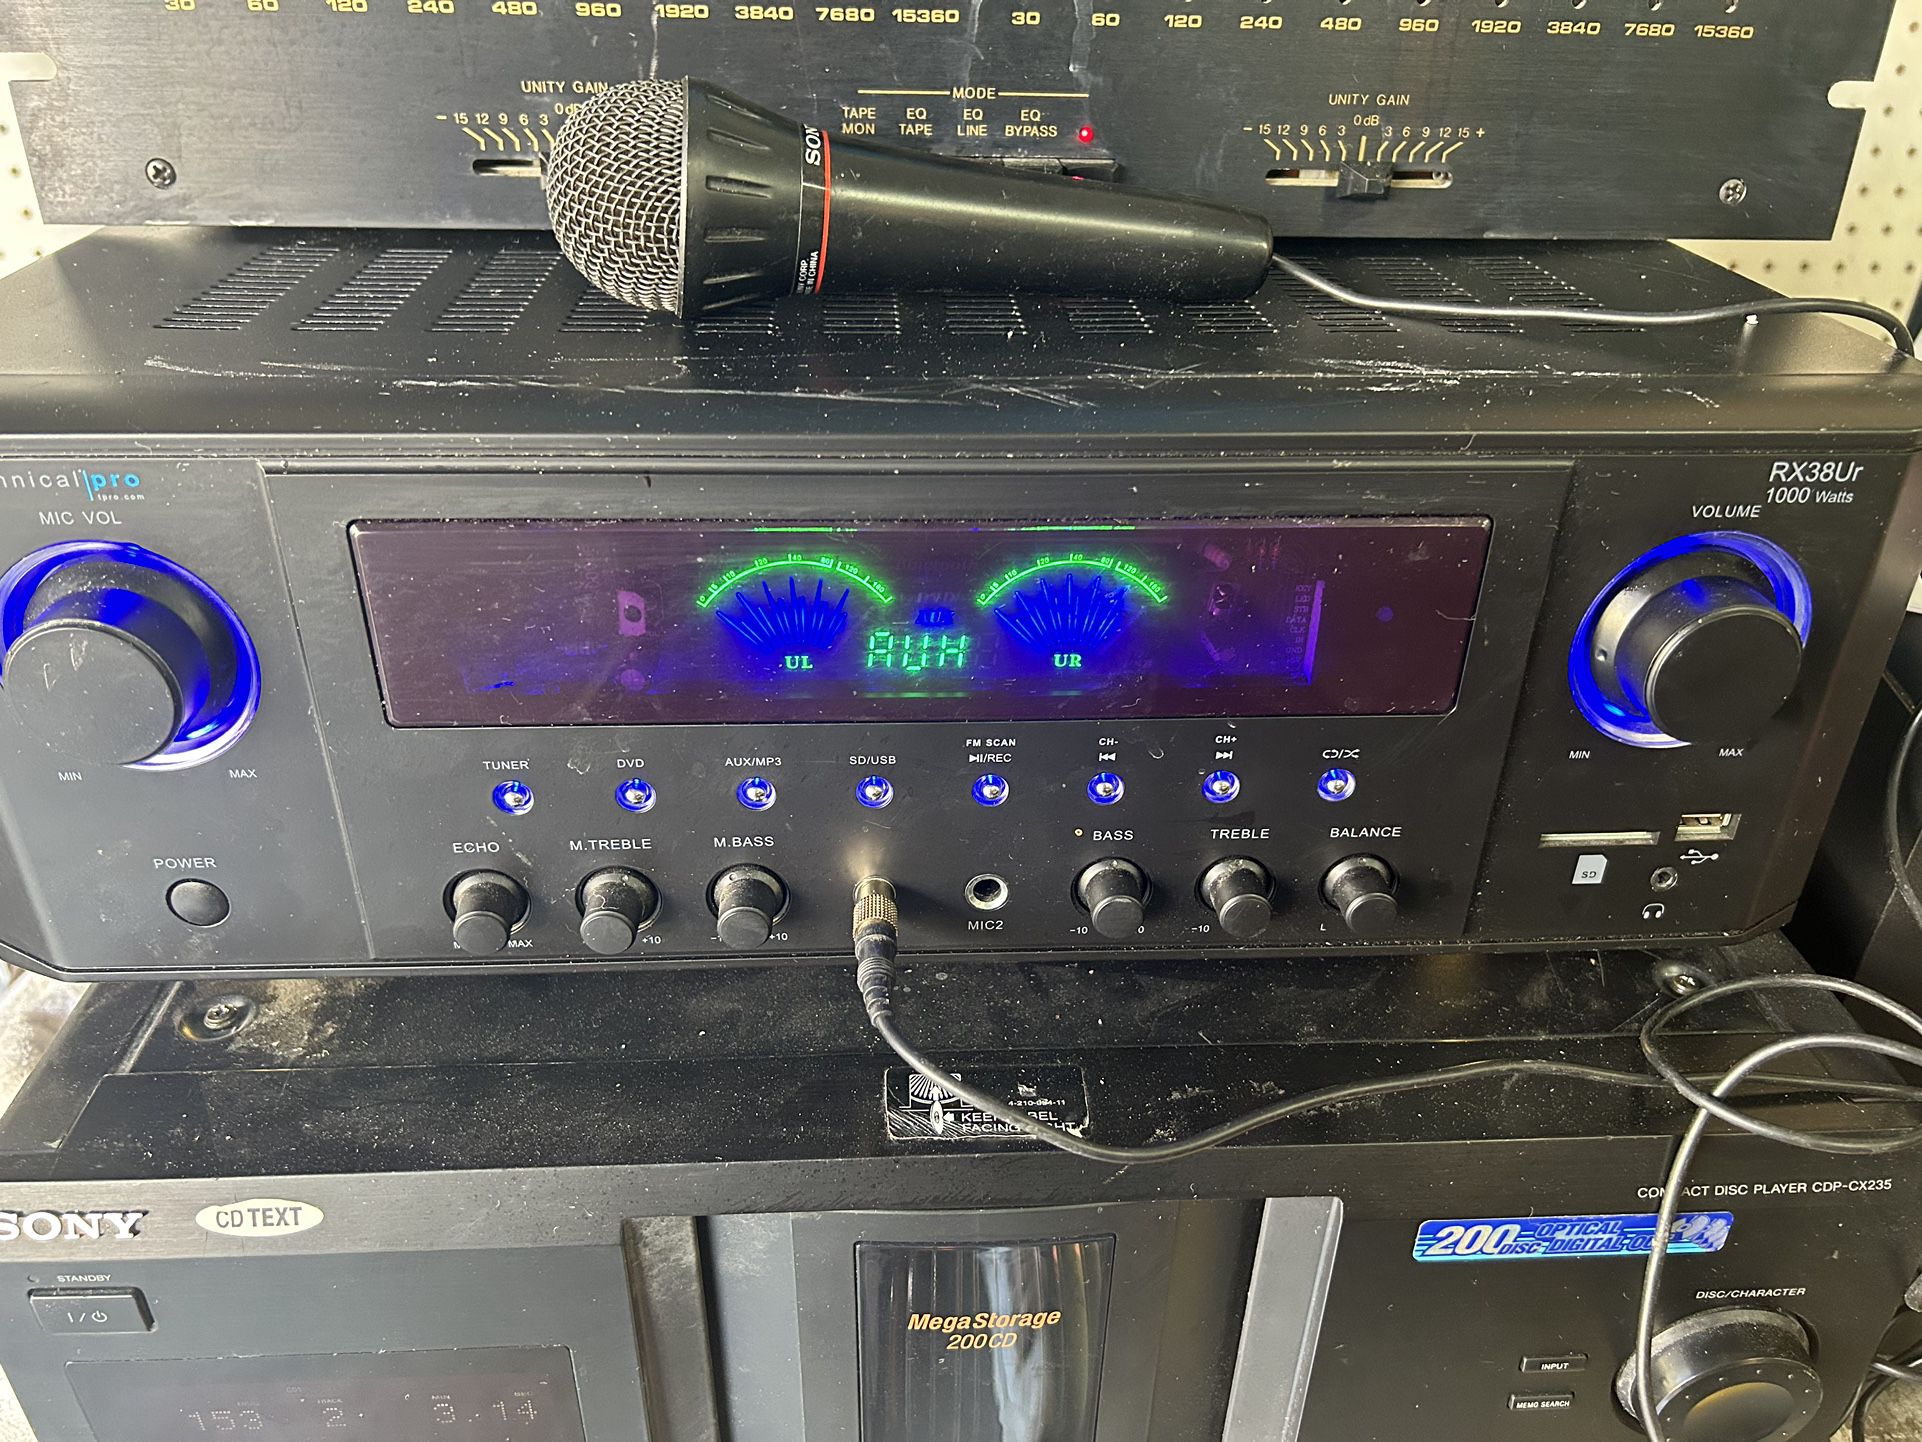 Stereo Receiver 